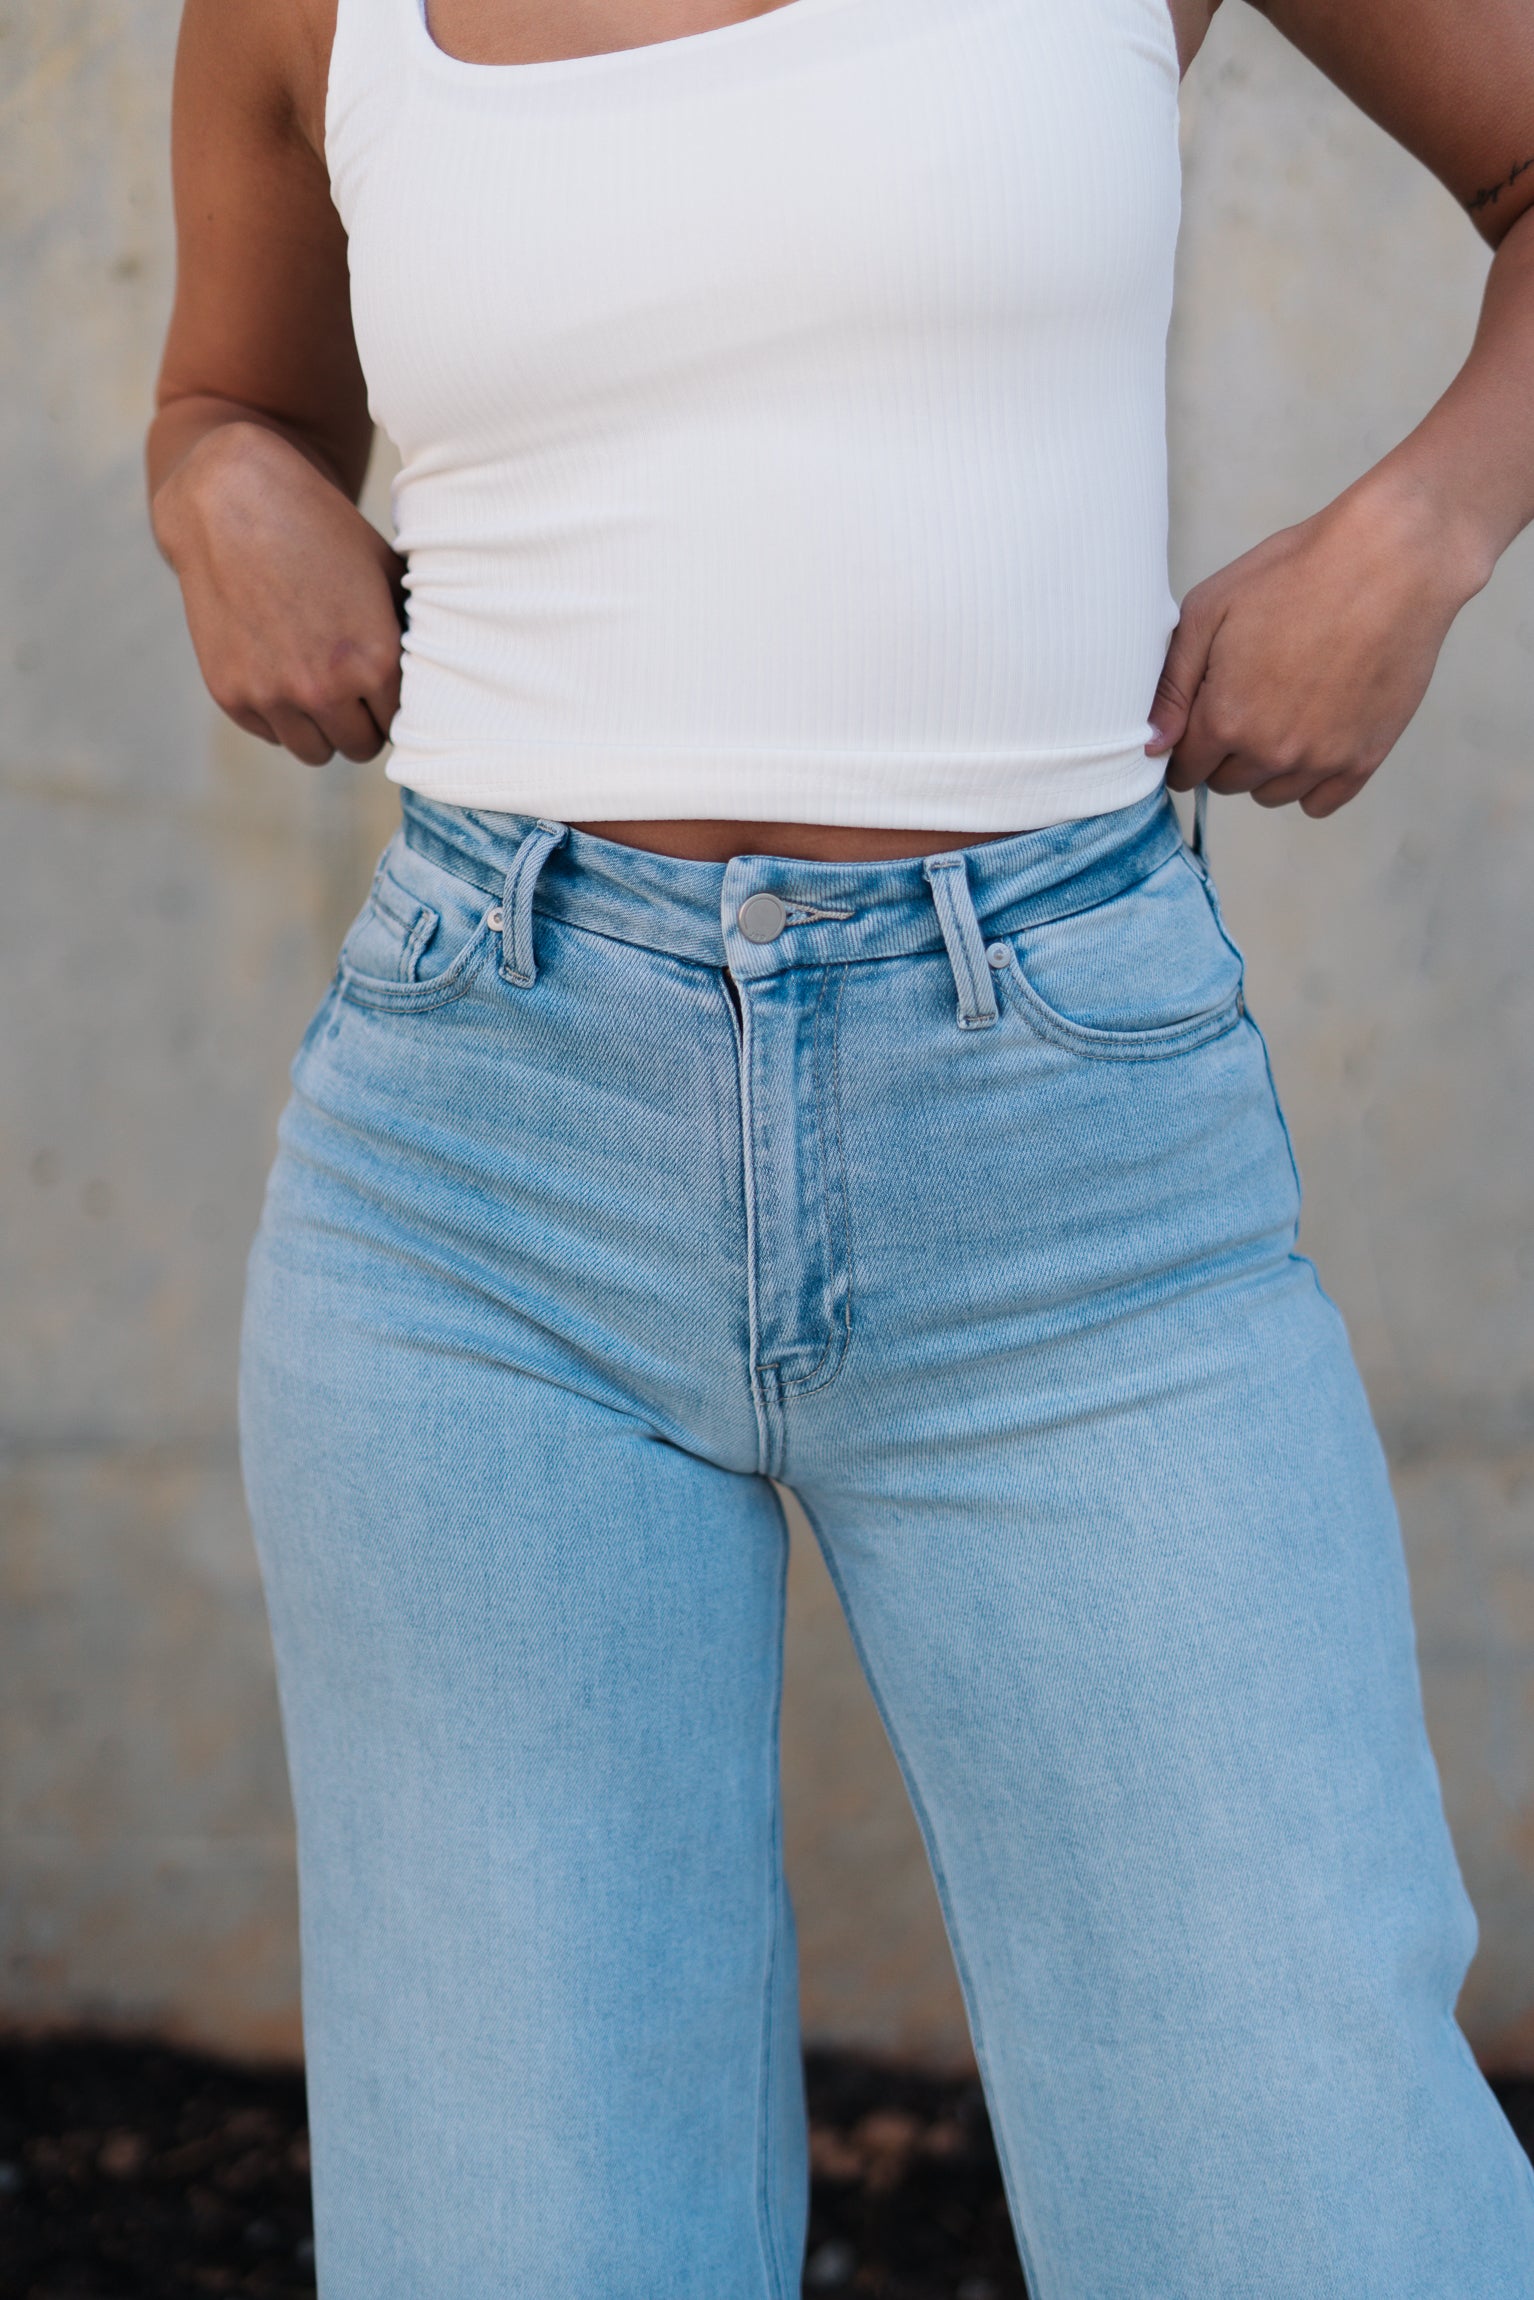 Upper body front view of female model wearing the Kristen Light Wash Wide Leg Jeans that features wide cropped legs, light wash denim, belt loops, pockets, and a zipper/button fly. Worn with white tank top